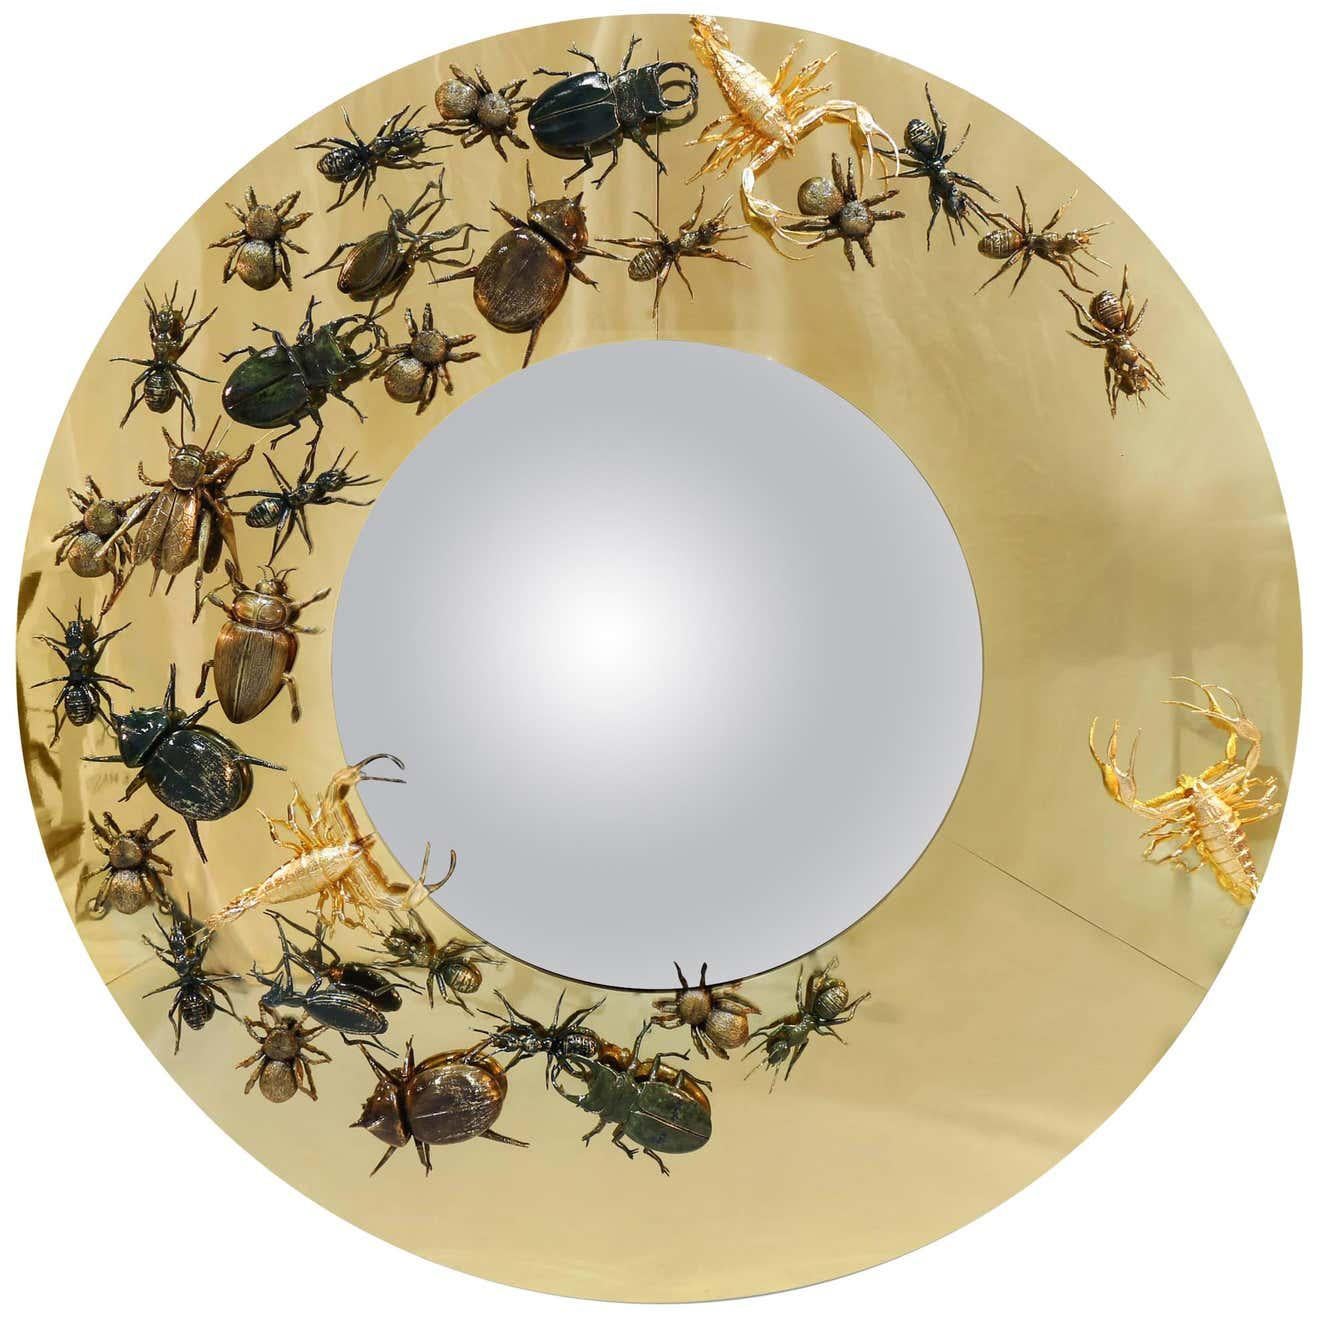 Mirror The Insects For Sale